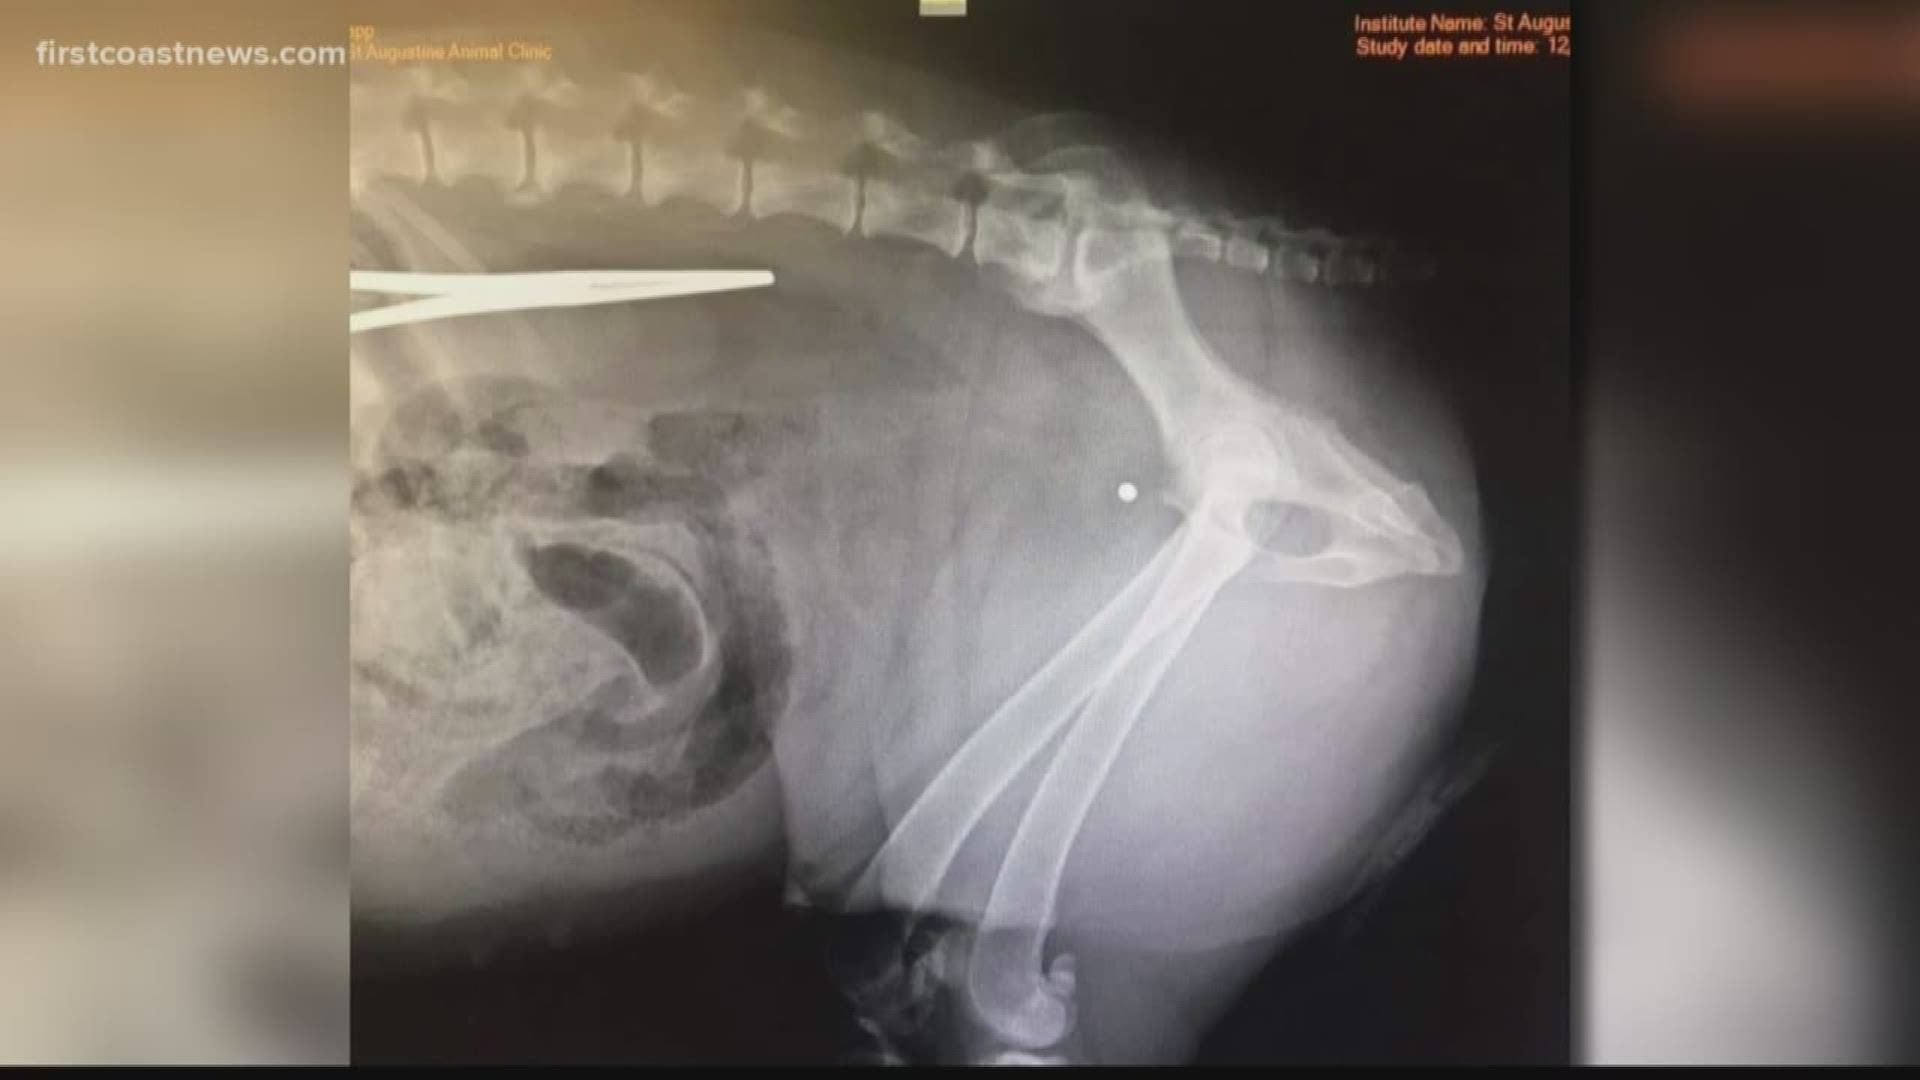 A woman in St. Augustine is looking for answers after her dog was shot with a pellet gun